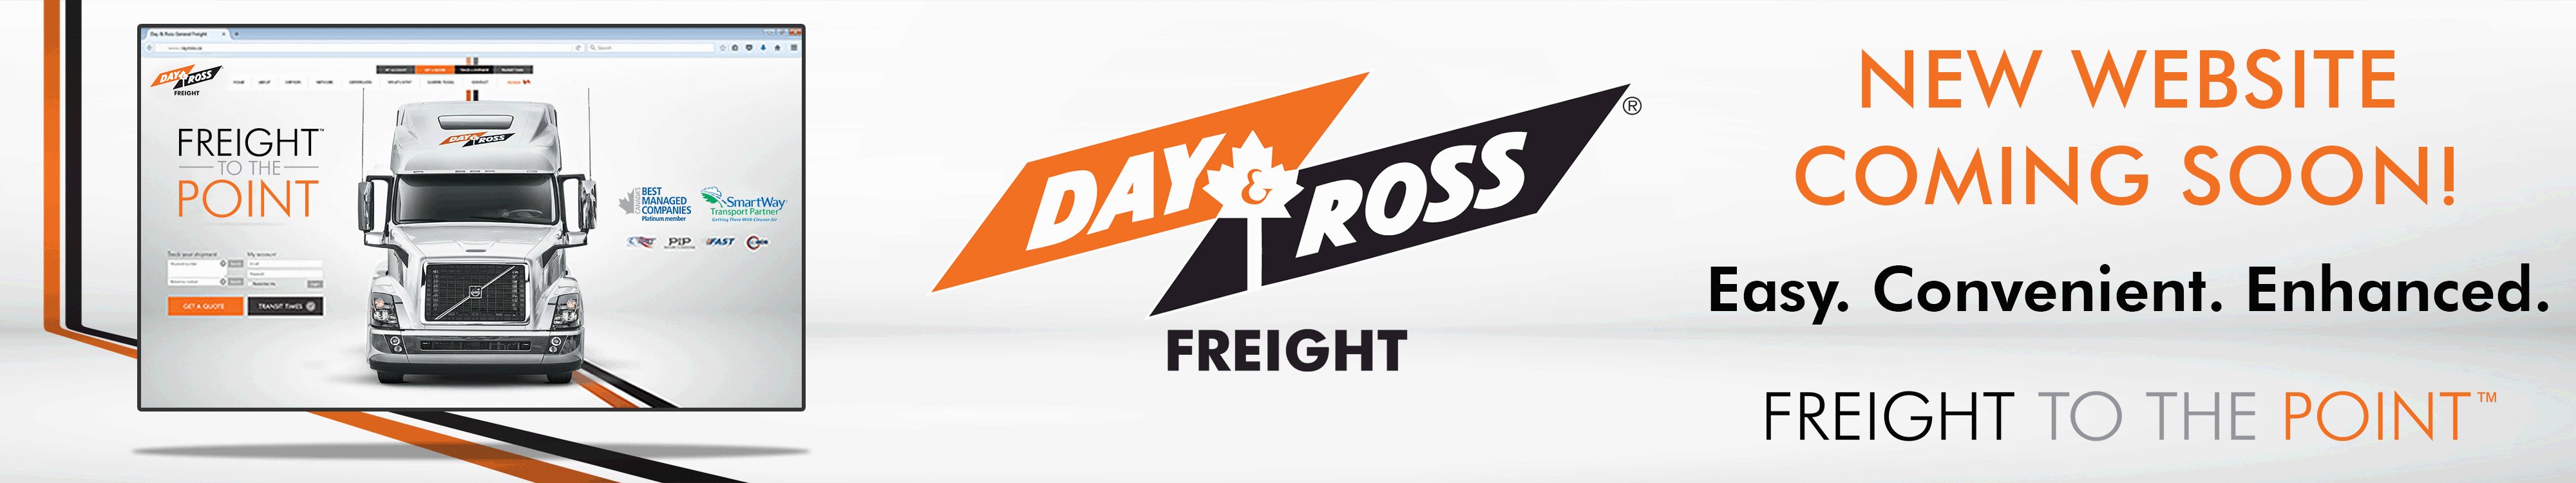 Day & Ross General Freight